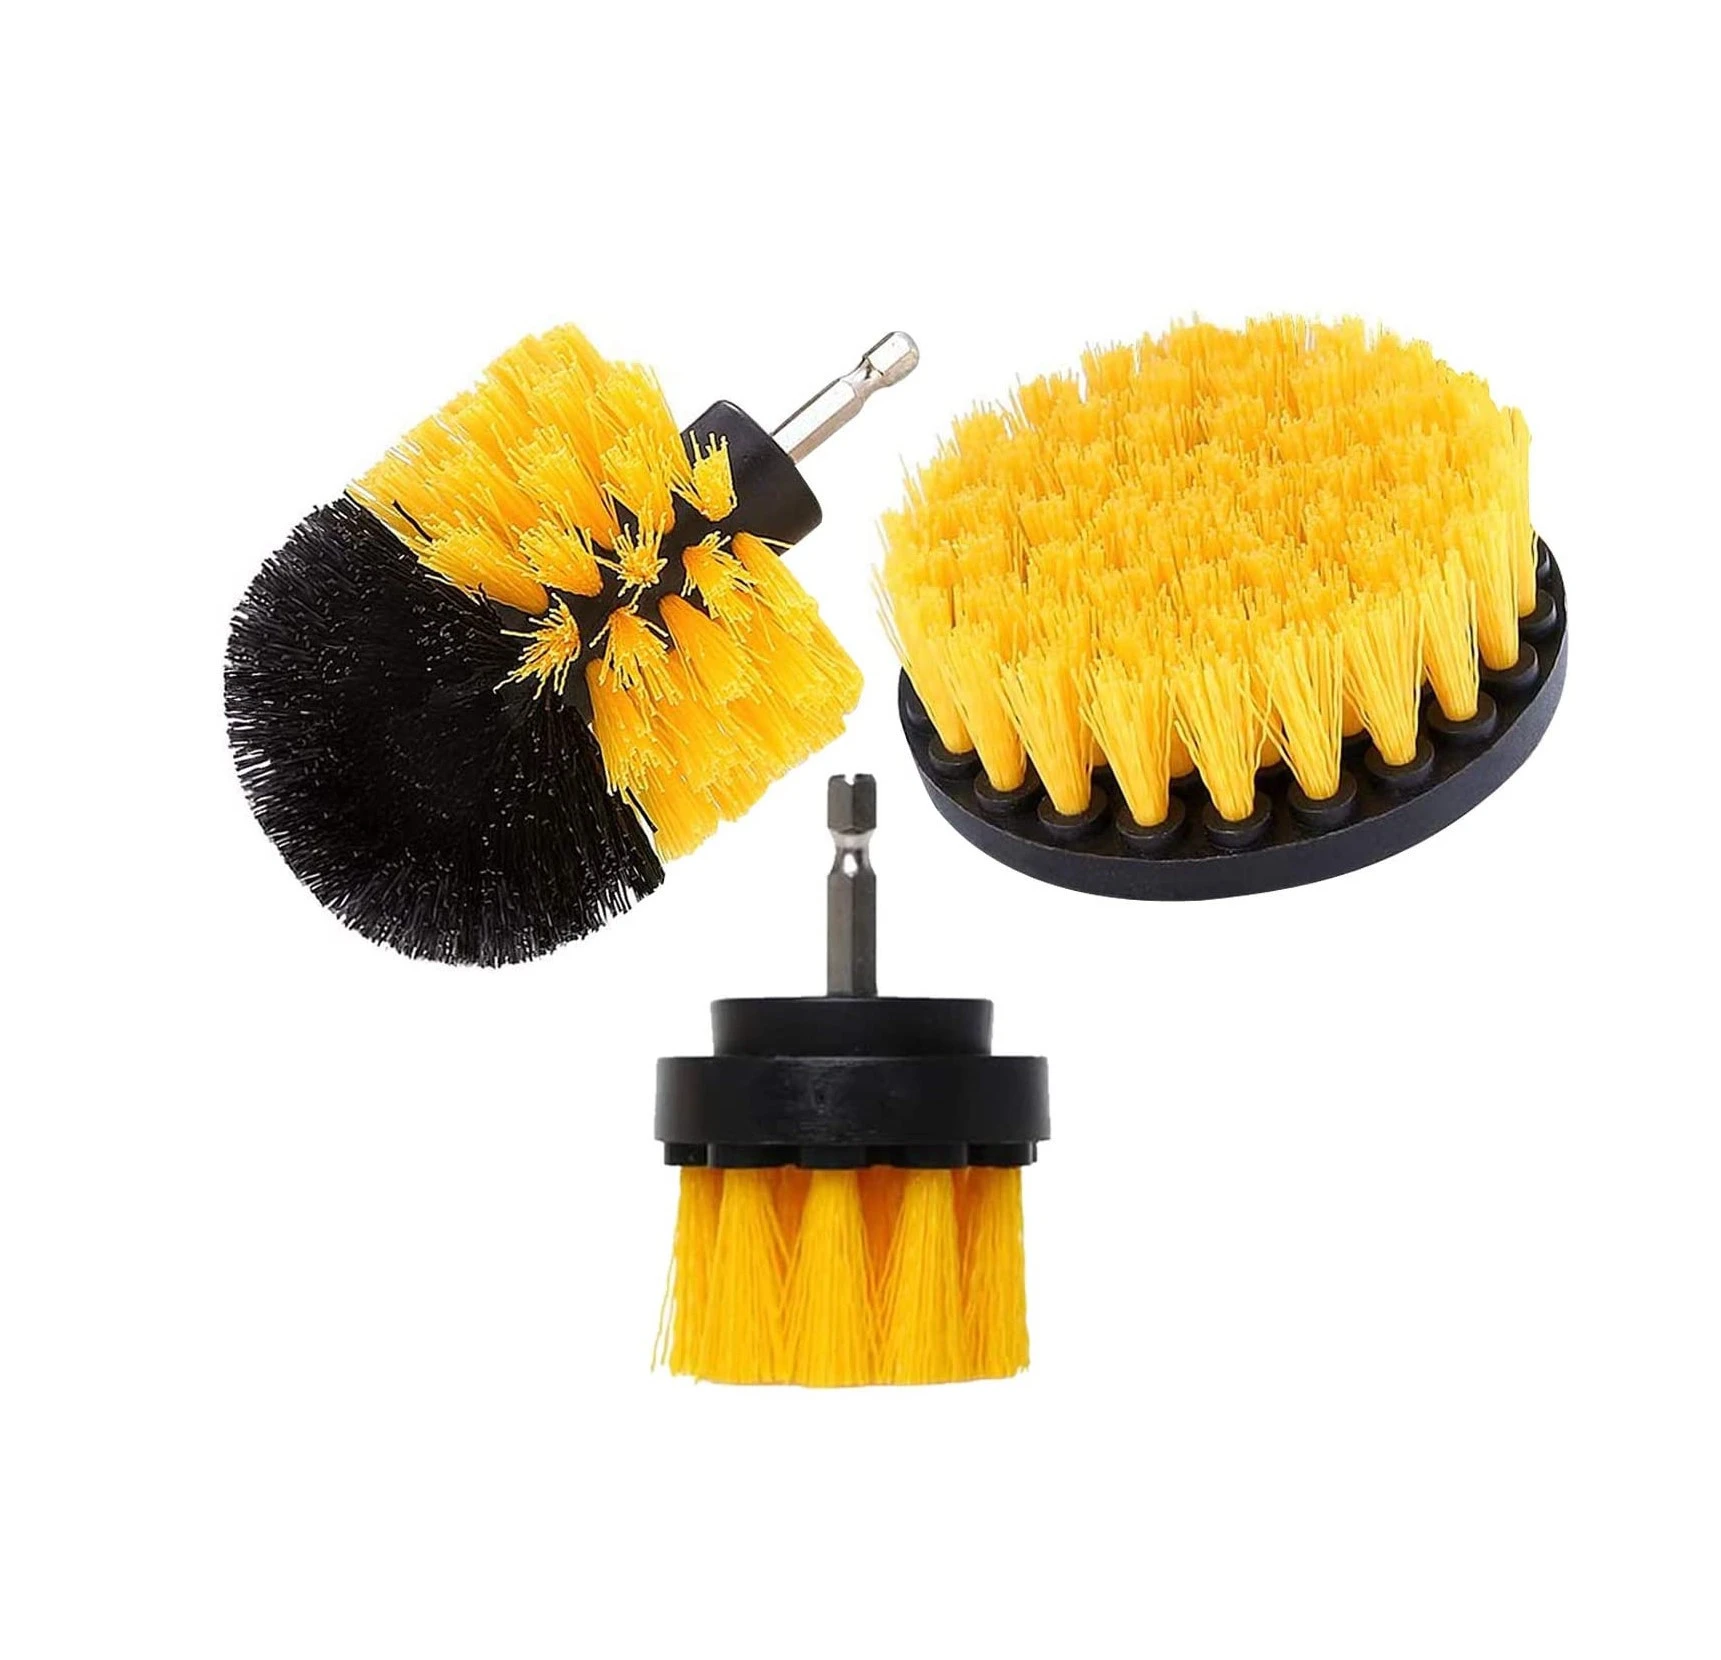 TDF rotating brush drill electric cleaning brush attachment